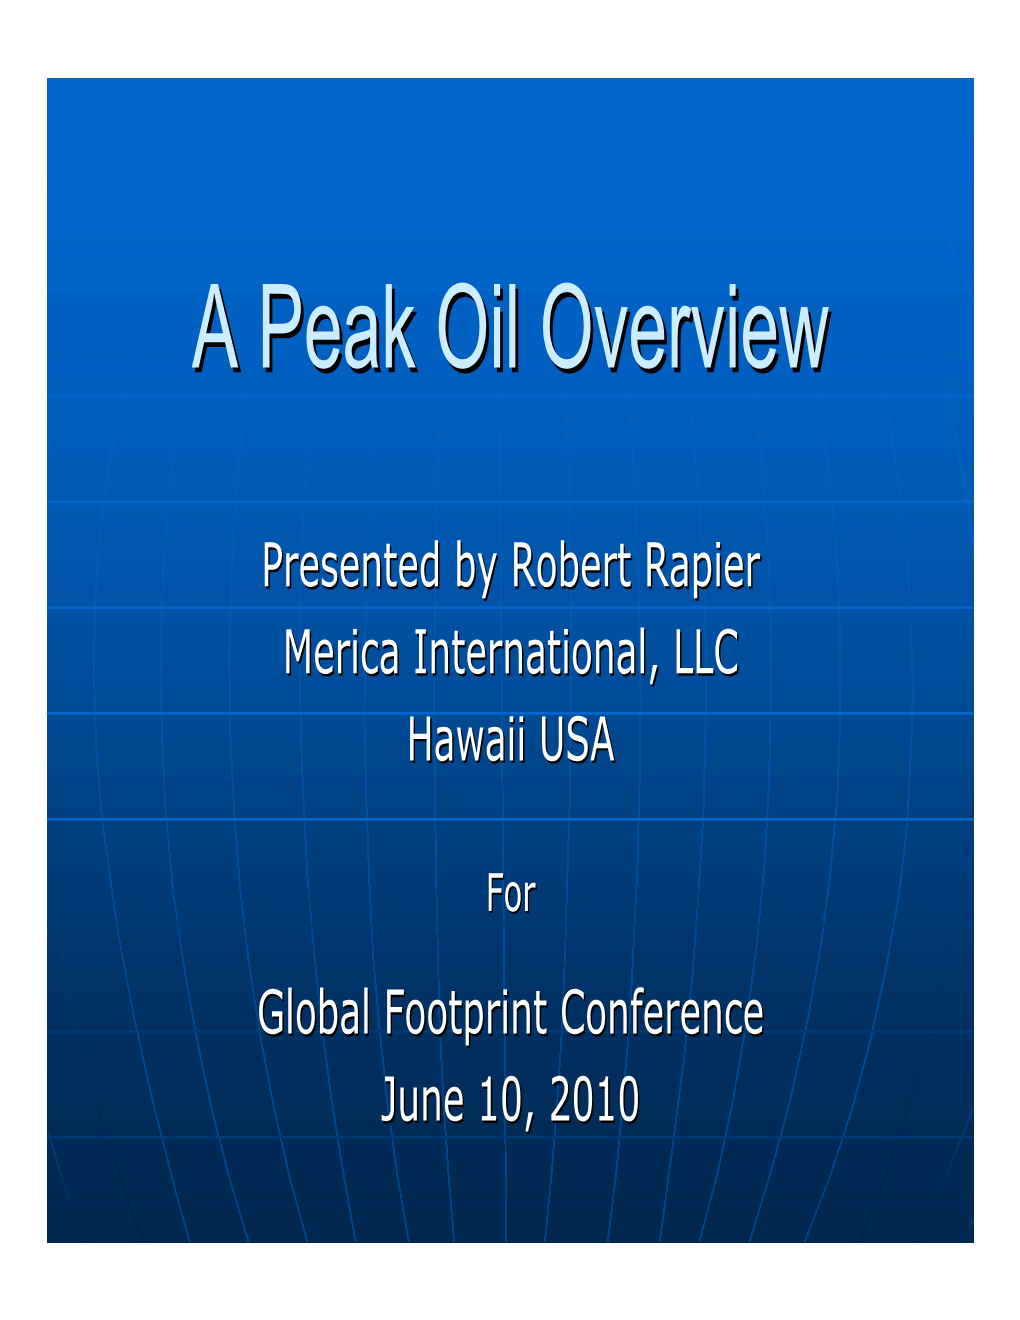 A Peak Oil Overview